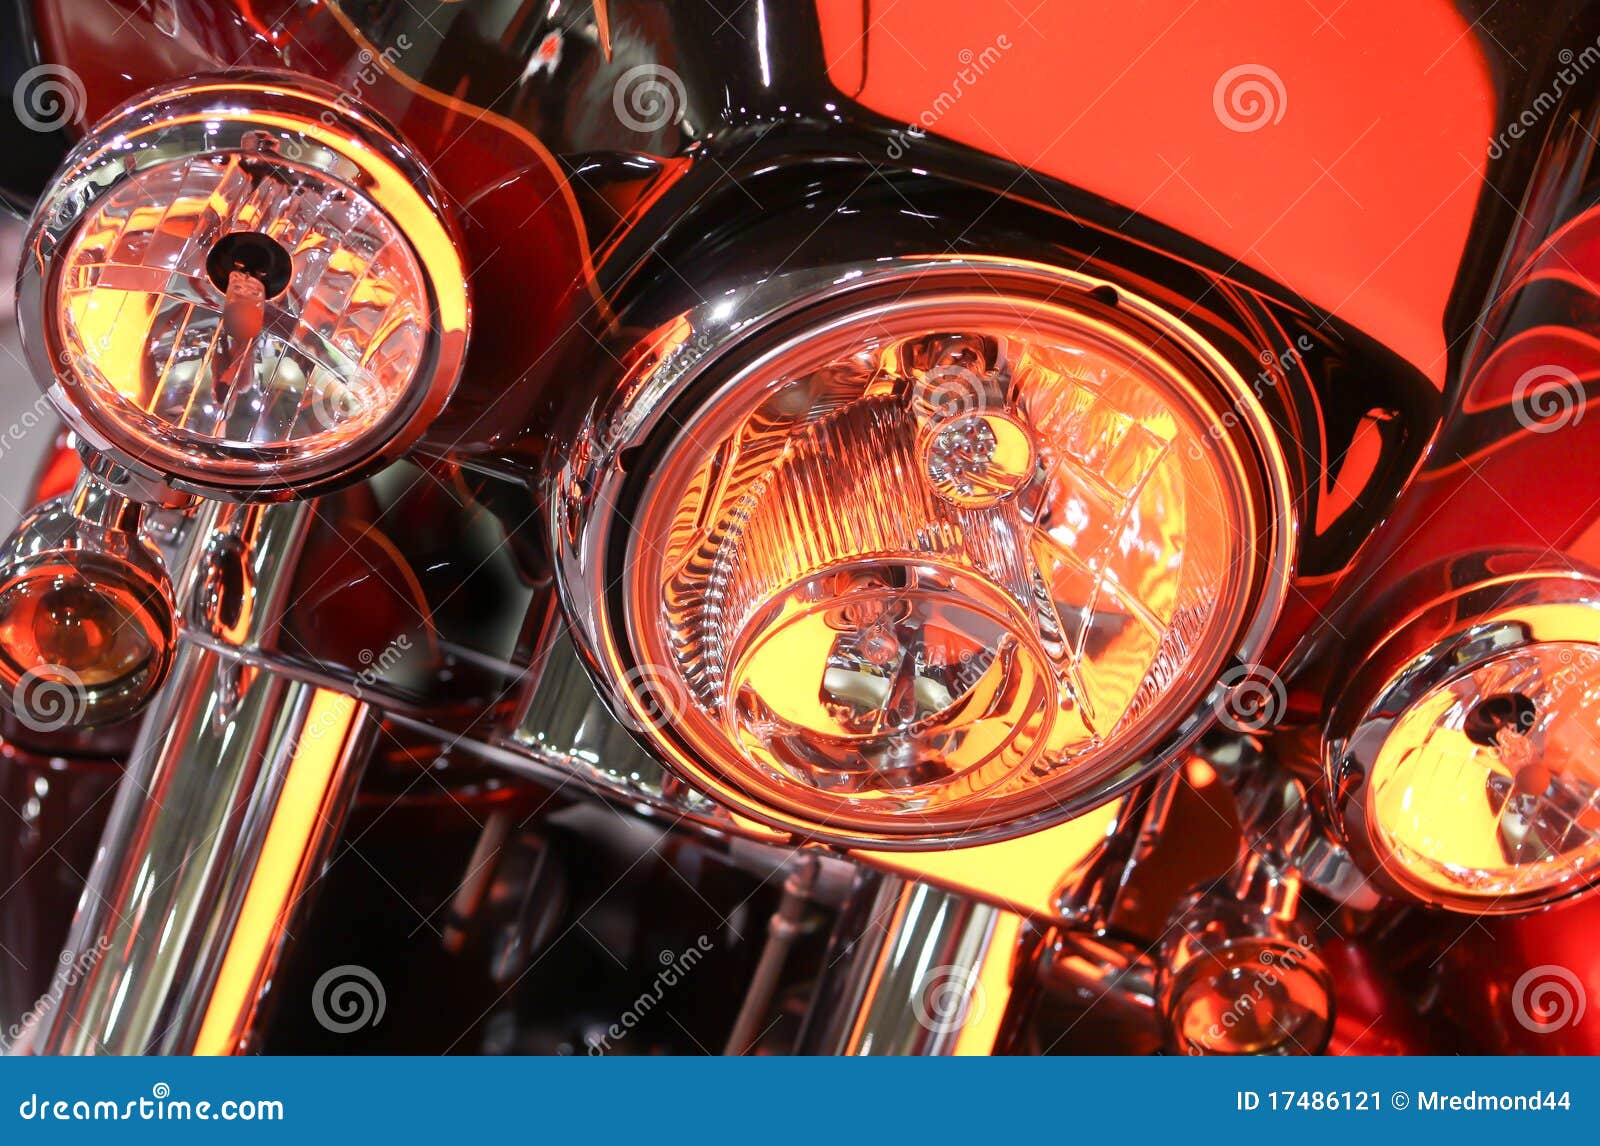 Motorcycle detail stock image. Image of detail, automotive - 17486121